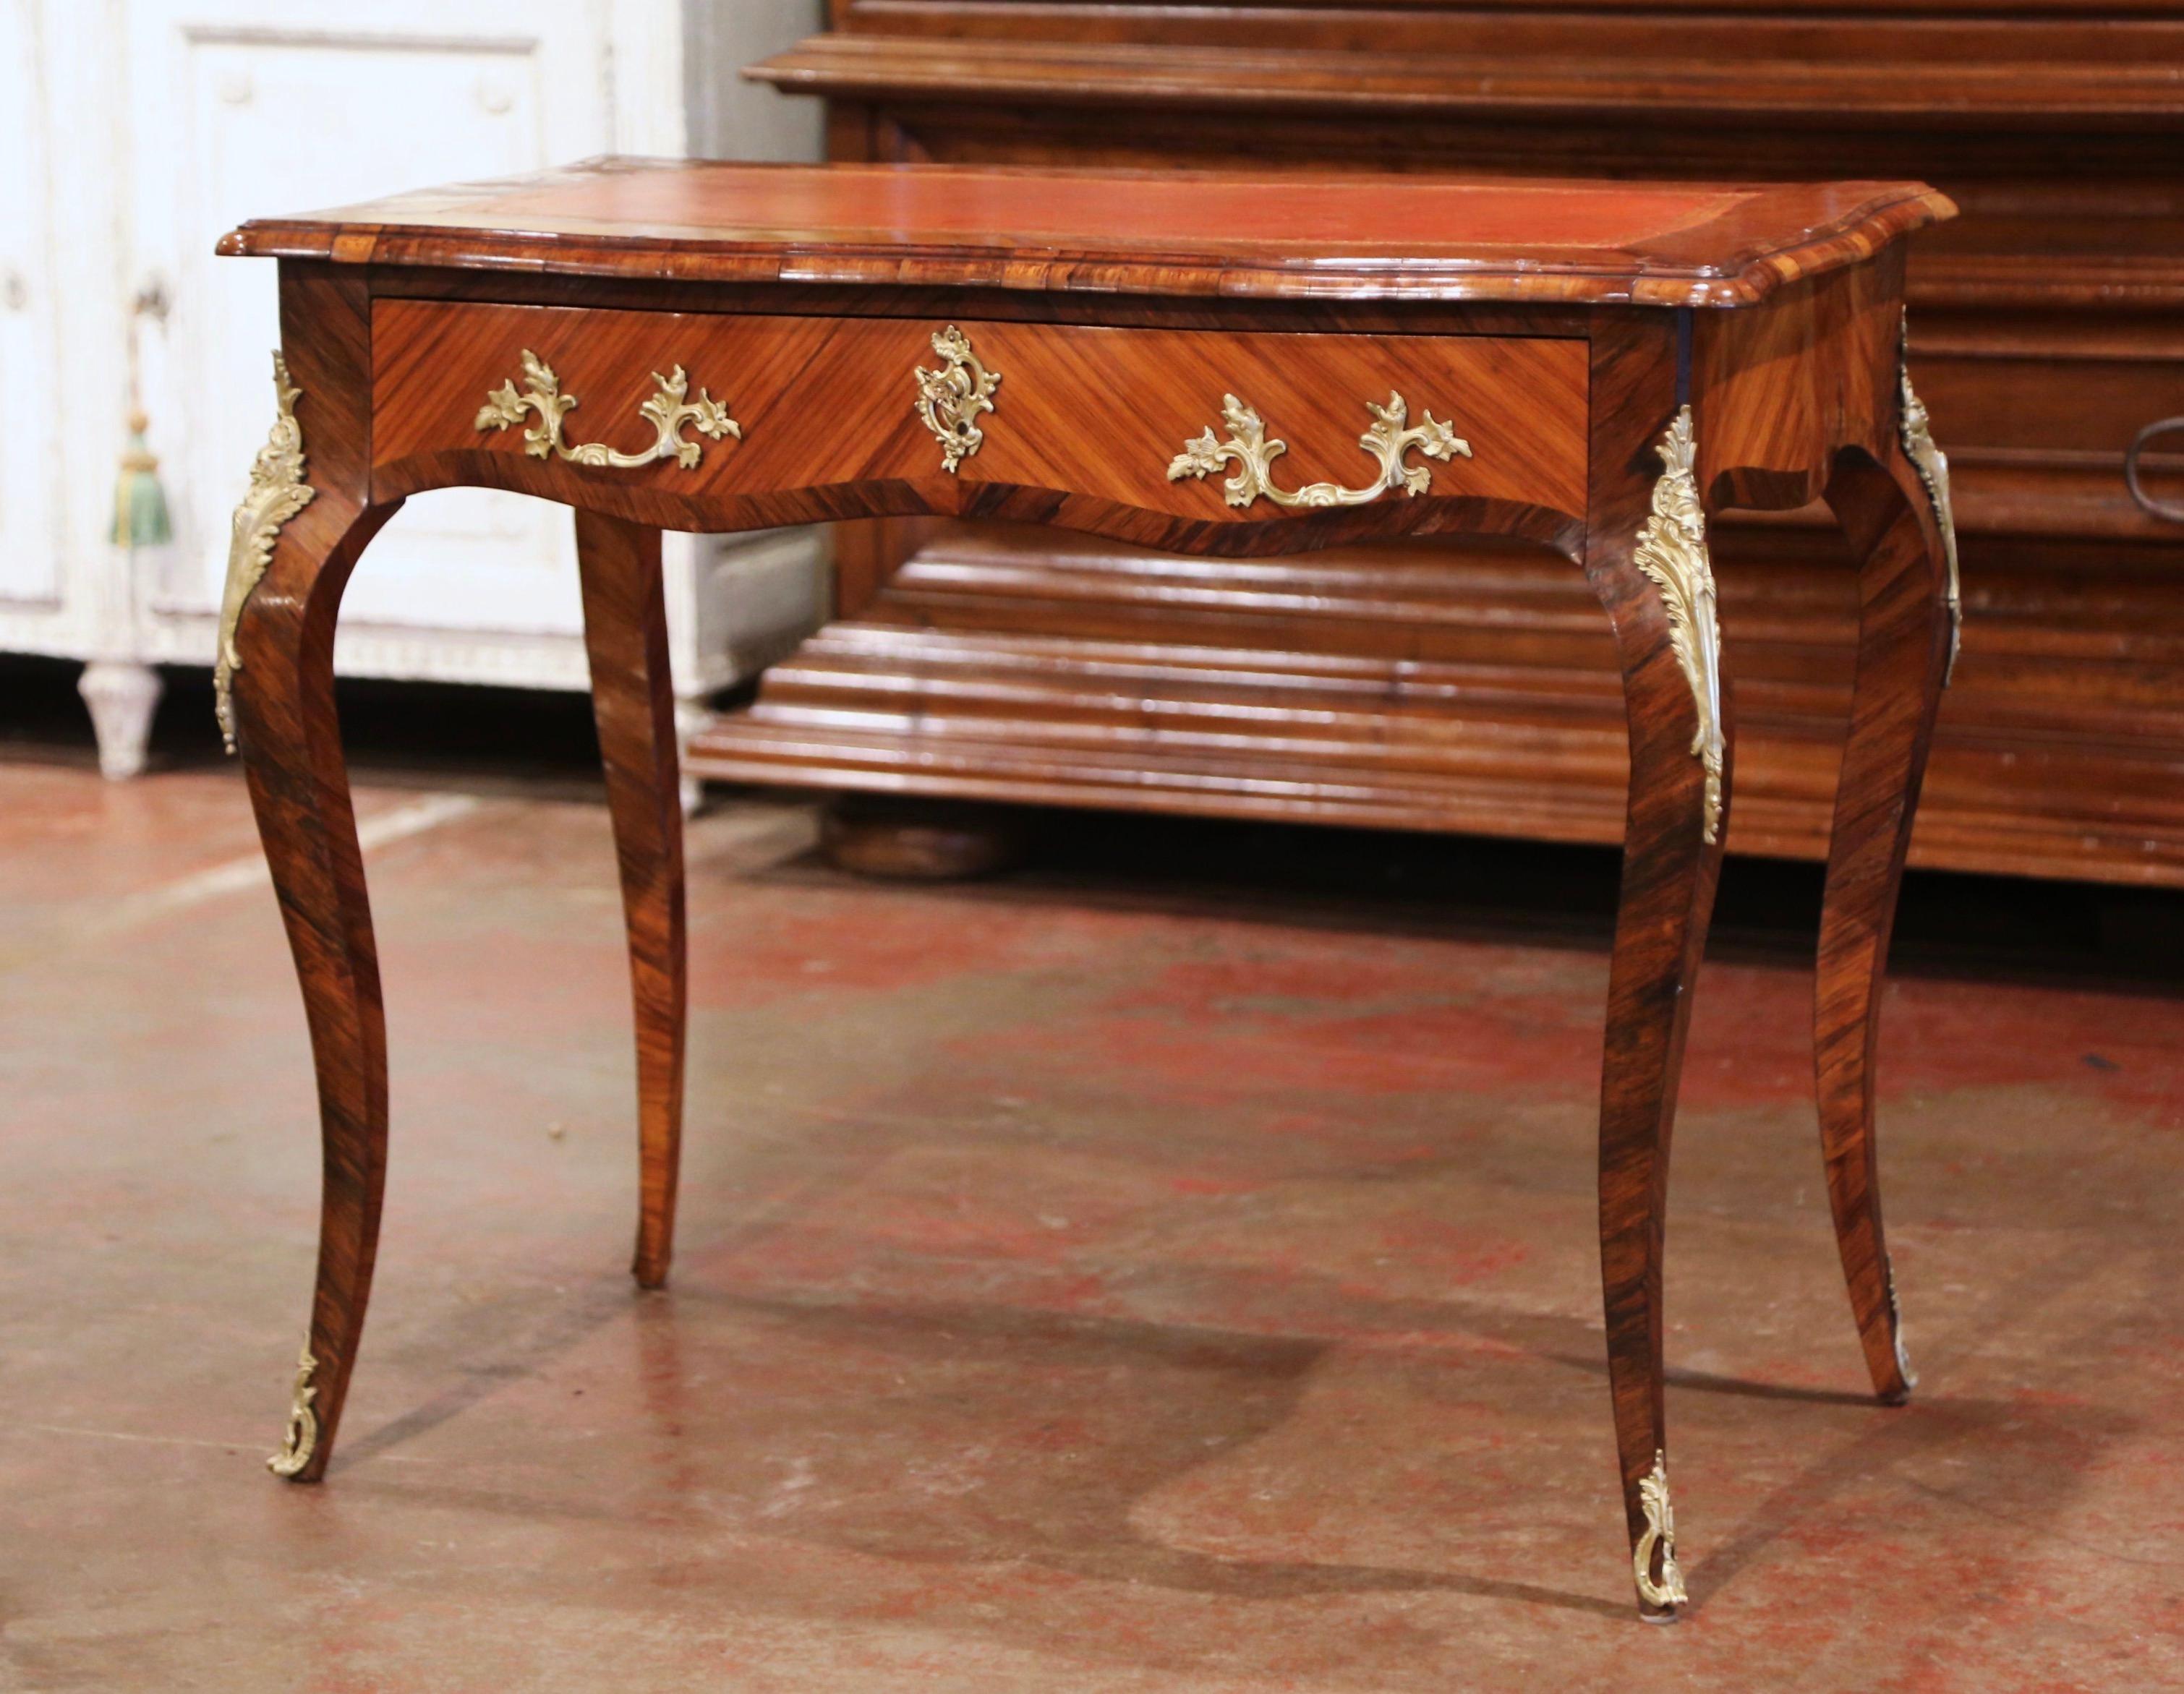 This elegant antique rosewood table was crafted in France, circa 1860. The writing table with serpentine front and bombe sides, stands on cabriole legs dressed with gilt bronze foliate mounts at the shoulders, and ending with scrolled bronze sabots